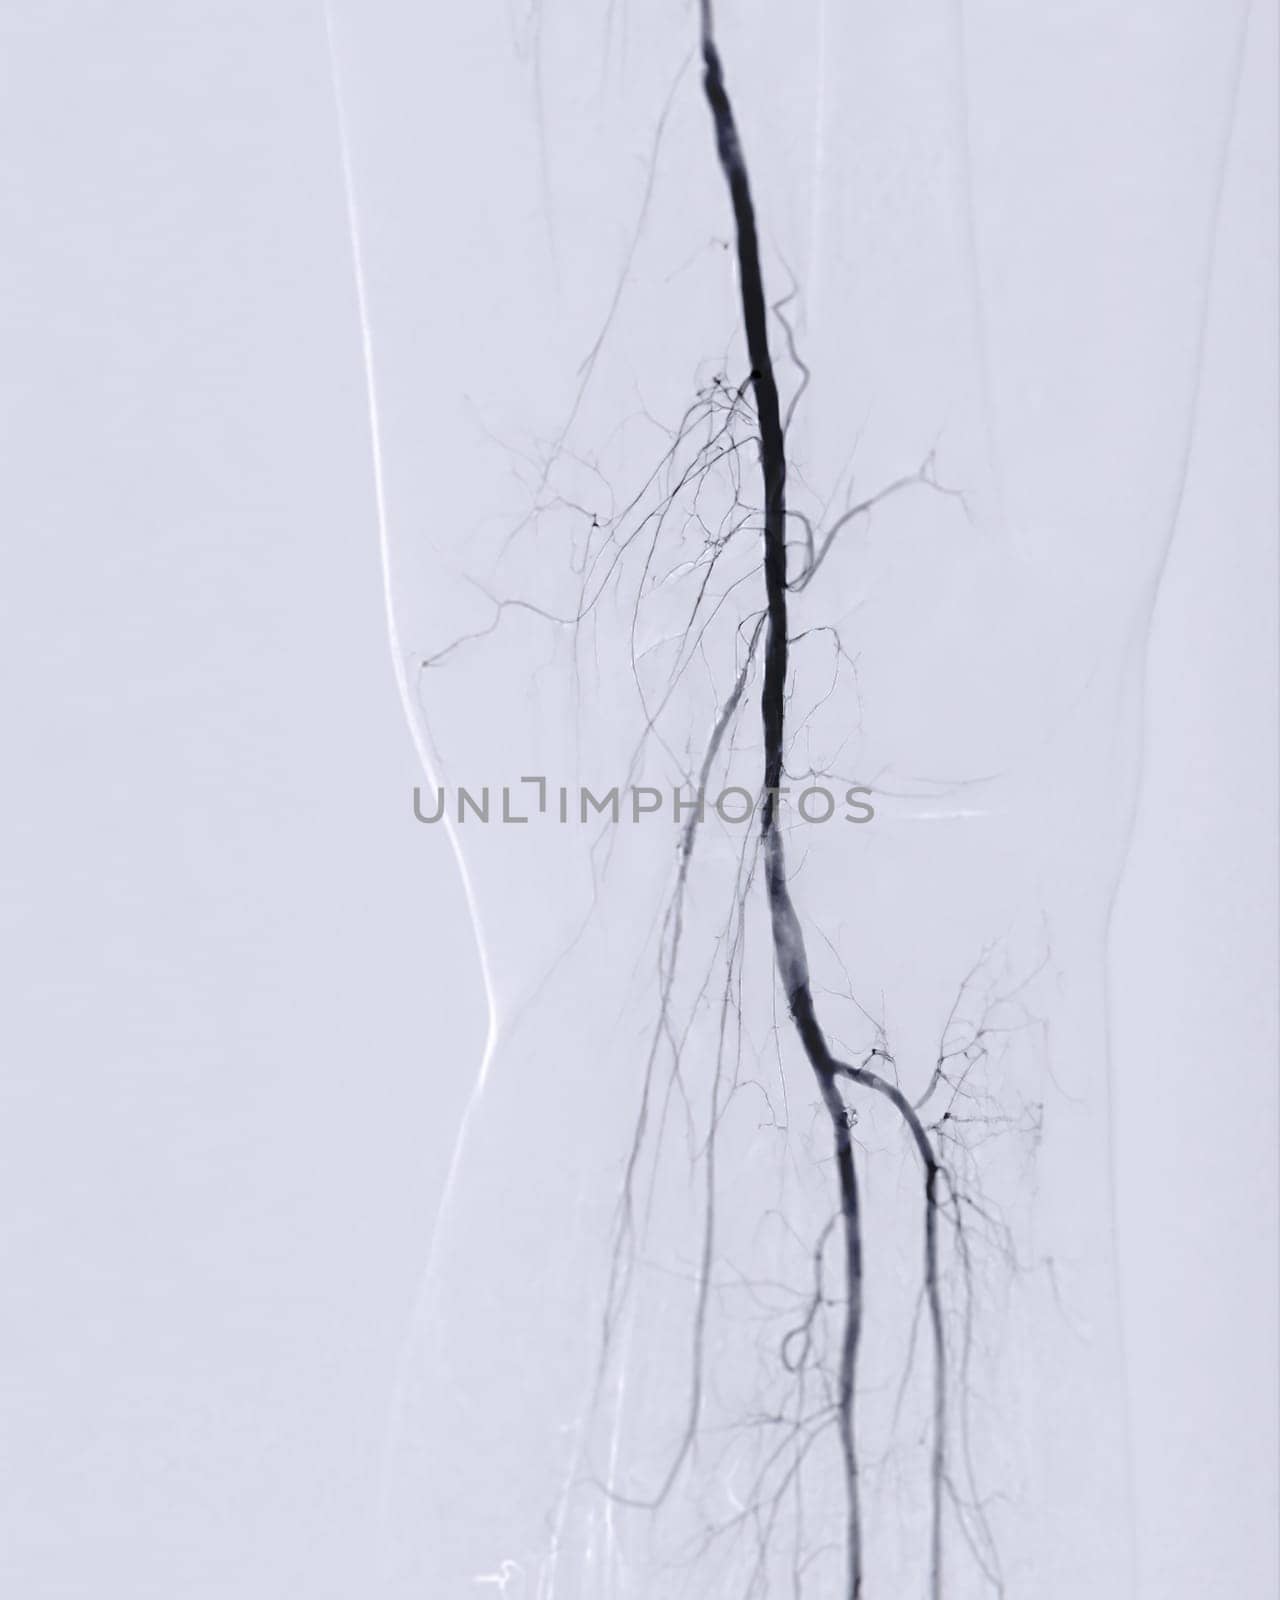 Femoral artery angiogram or angiography  by samunella